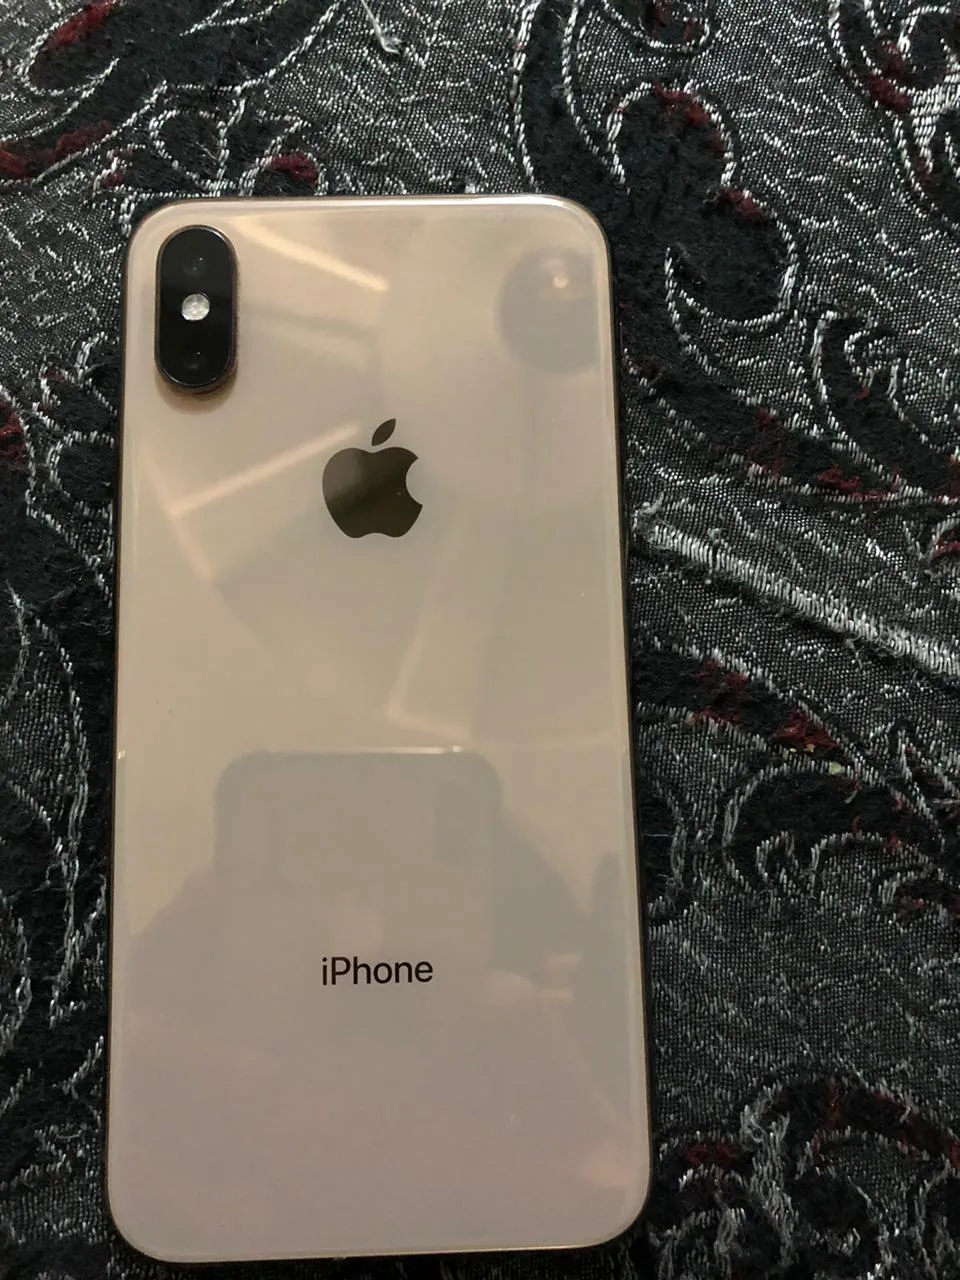 iPhone XS 64gb gold for sale at attractive price - photo 3